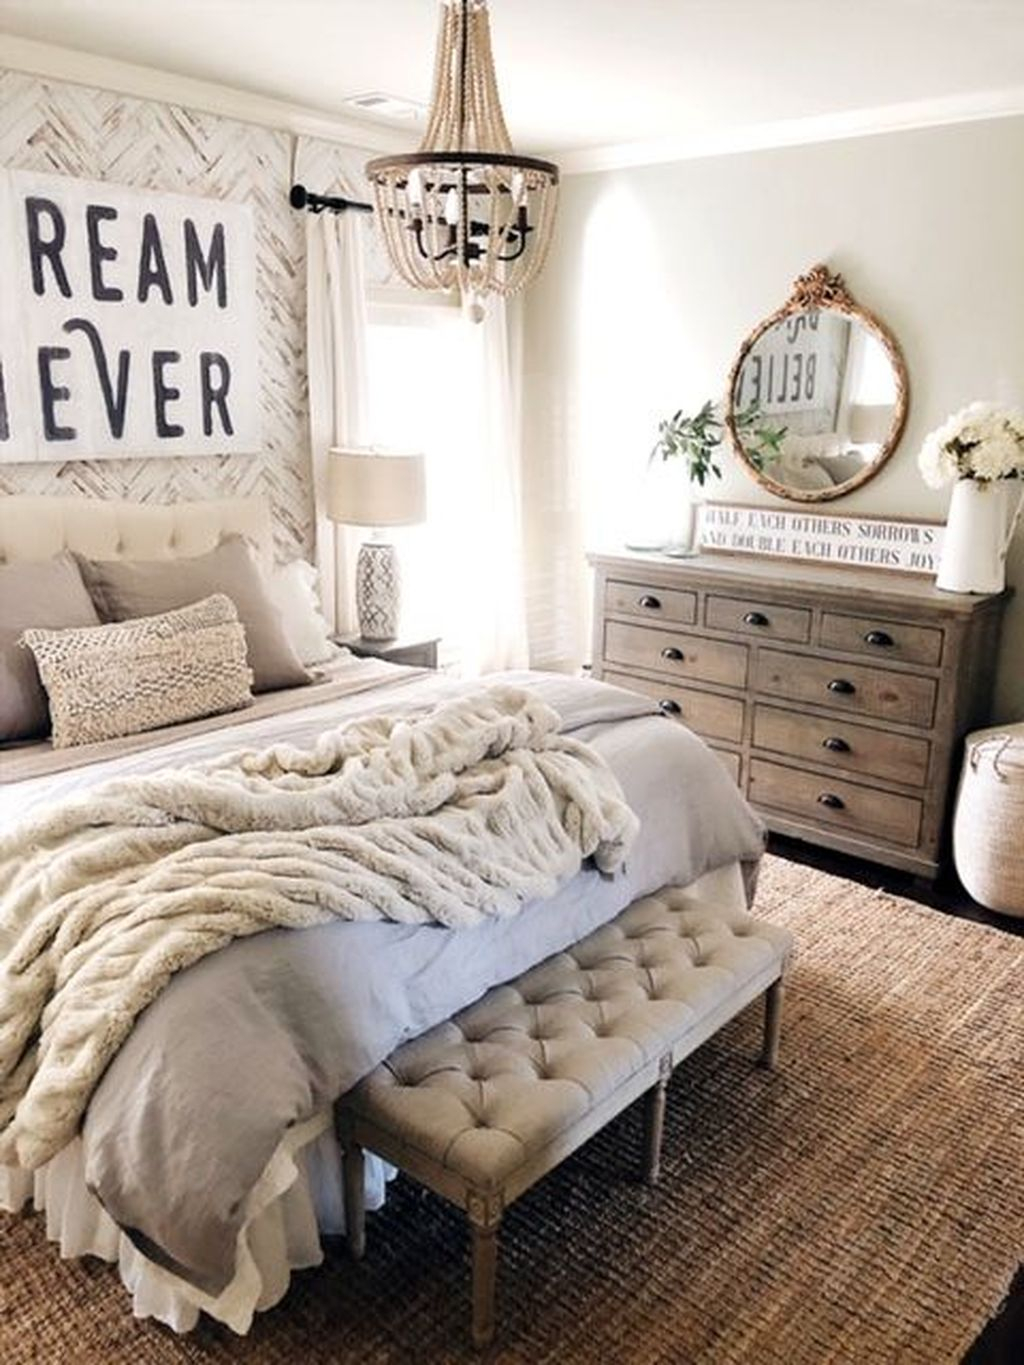 Admiring Bedroom Decor Ideas To Have Right Now 20